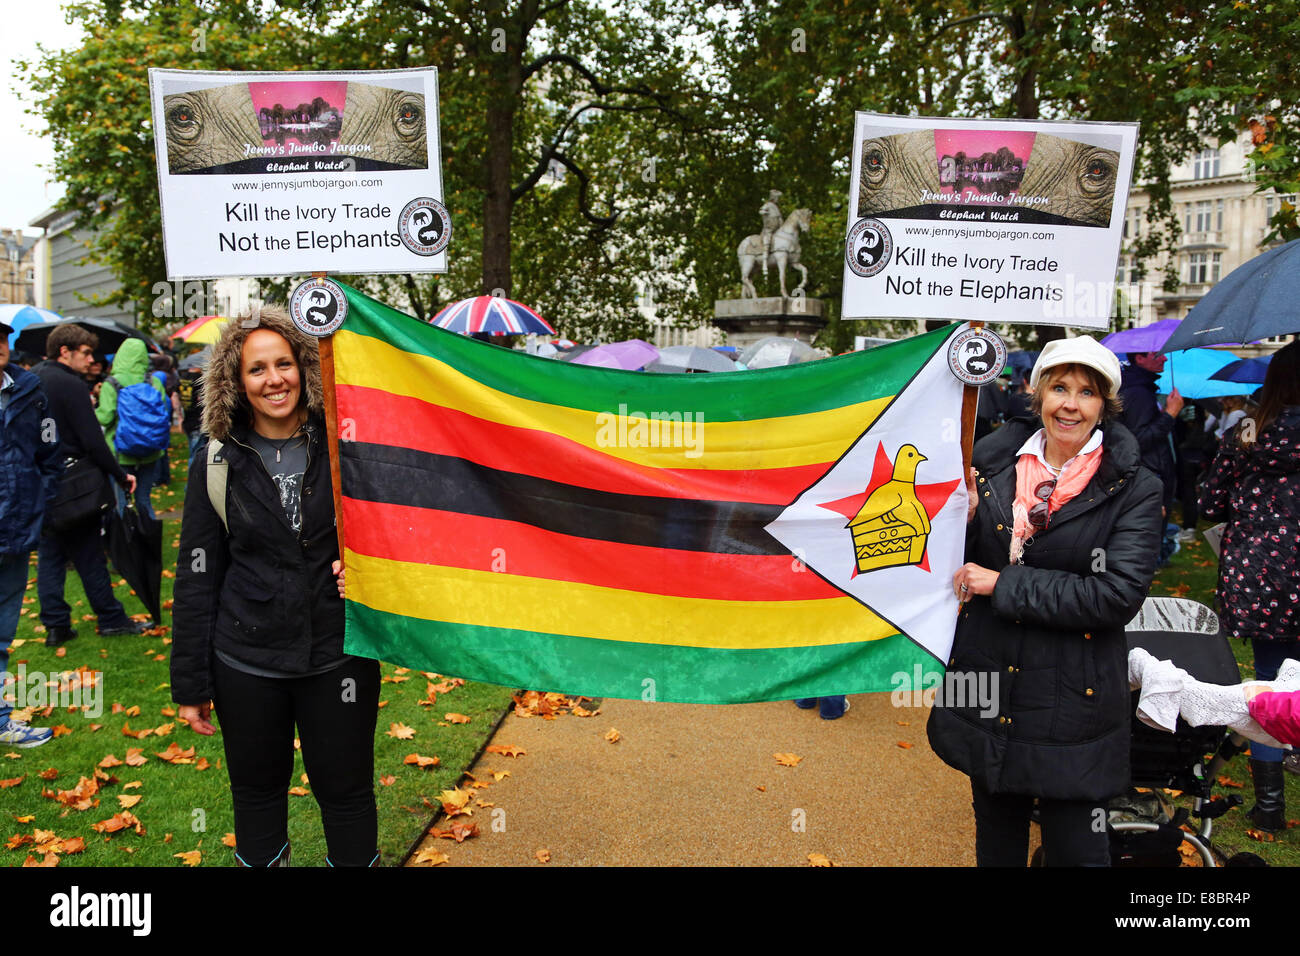 London, UK. 4th October 2014. Marchers at the Global March for Elephants and Rhinos, London, England. Rain didn't dampen the spirits of the marchers raising awareness of the plight of elephants and rhinos which amongst other things are being killed by poachers for ivory and souvenirs. Credit:  Paul Brown/Alamy Live News Stock Photo